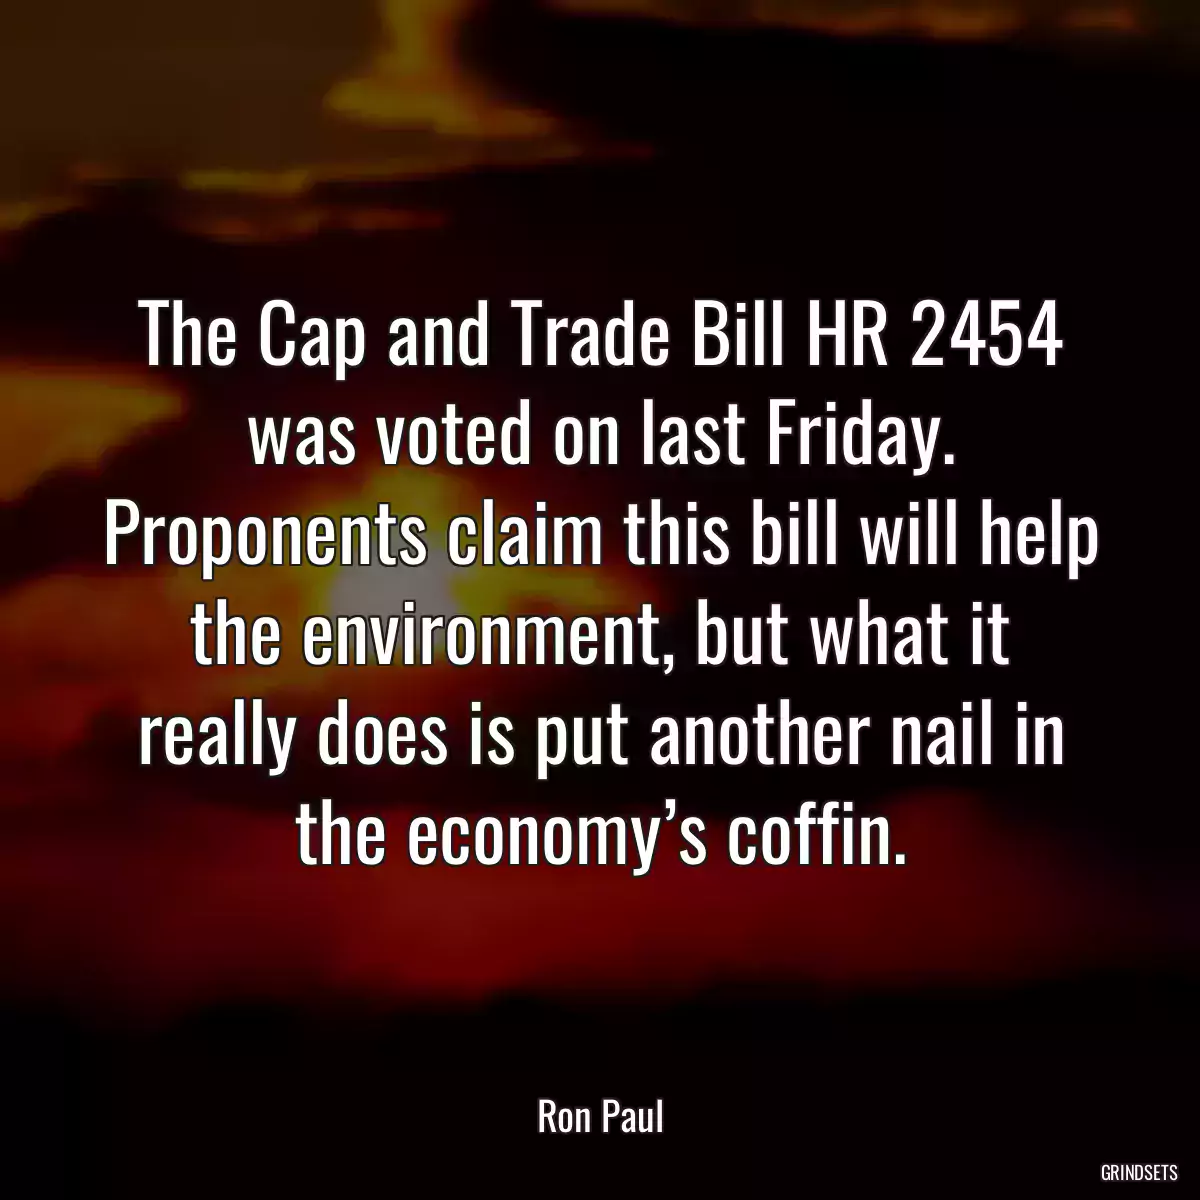 The Cap and Trade Bill HR 2454 was voted on last Friday. Proponents claim this bill will help the environment, but what it really does is put another nail in the economy’s coffin.